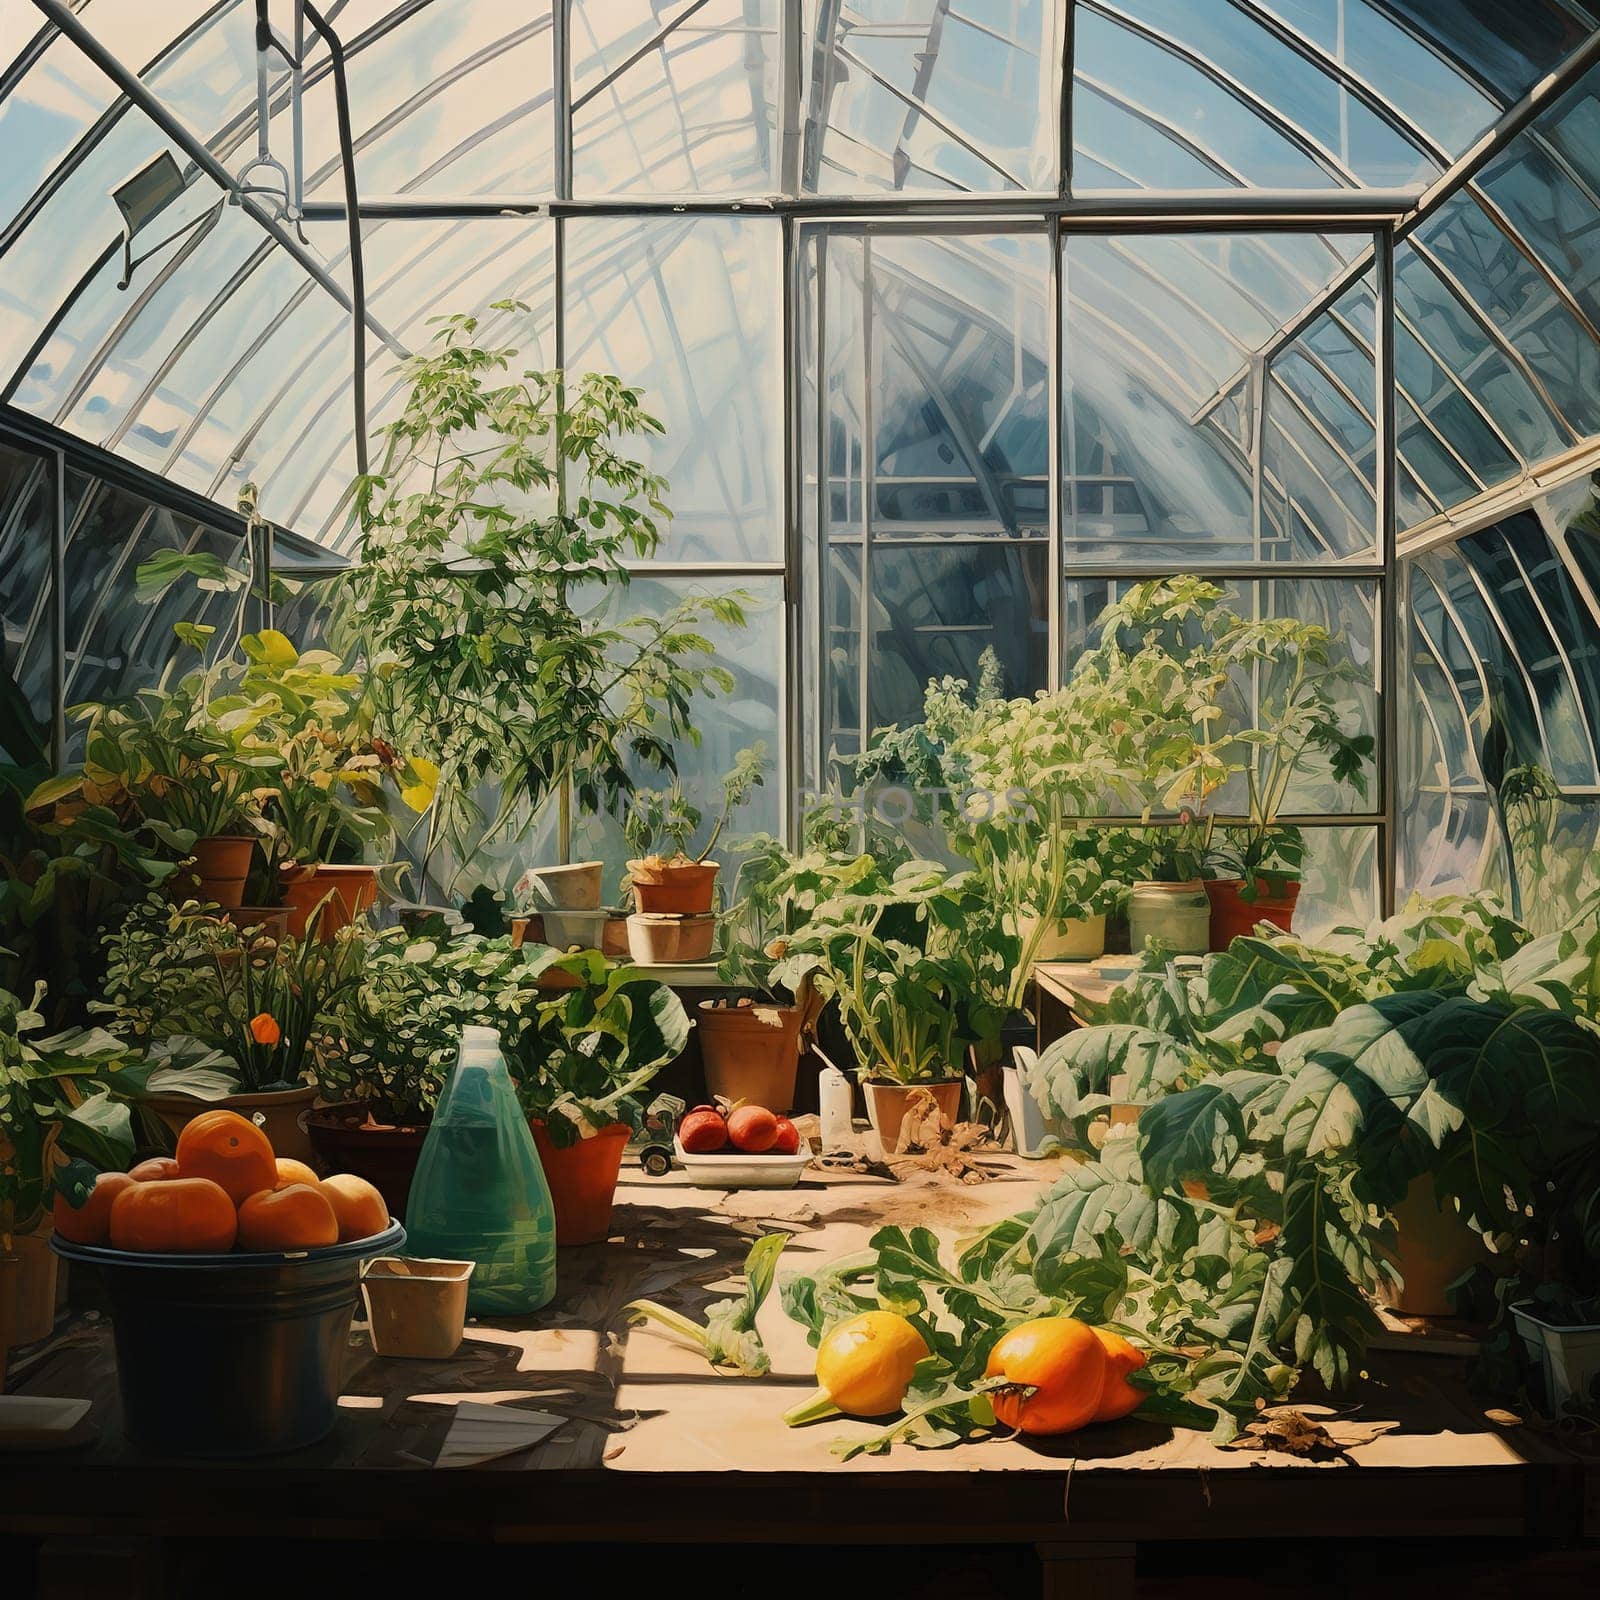 Greenhouse with kind of vegetable and gardening equipment, an agricultural concept